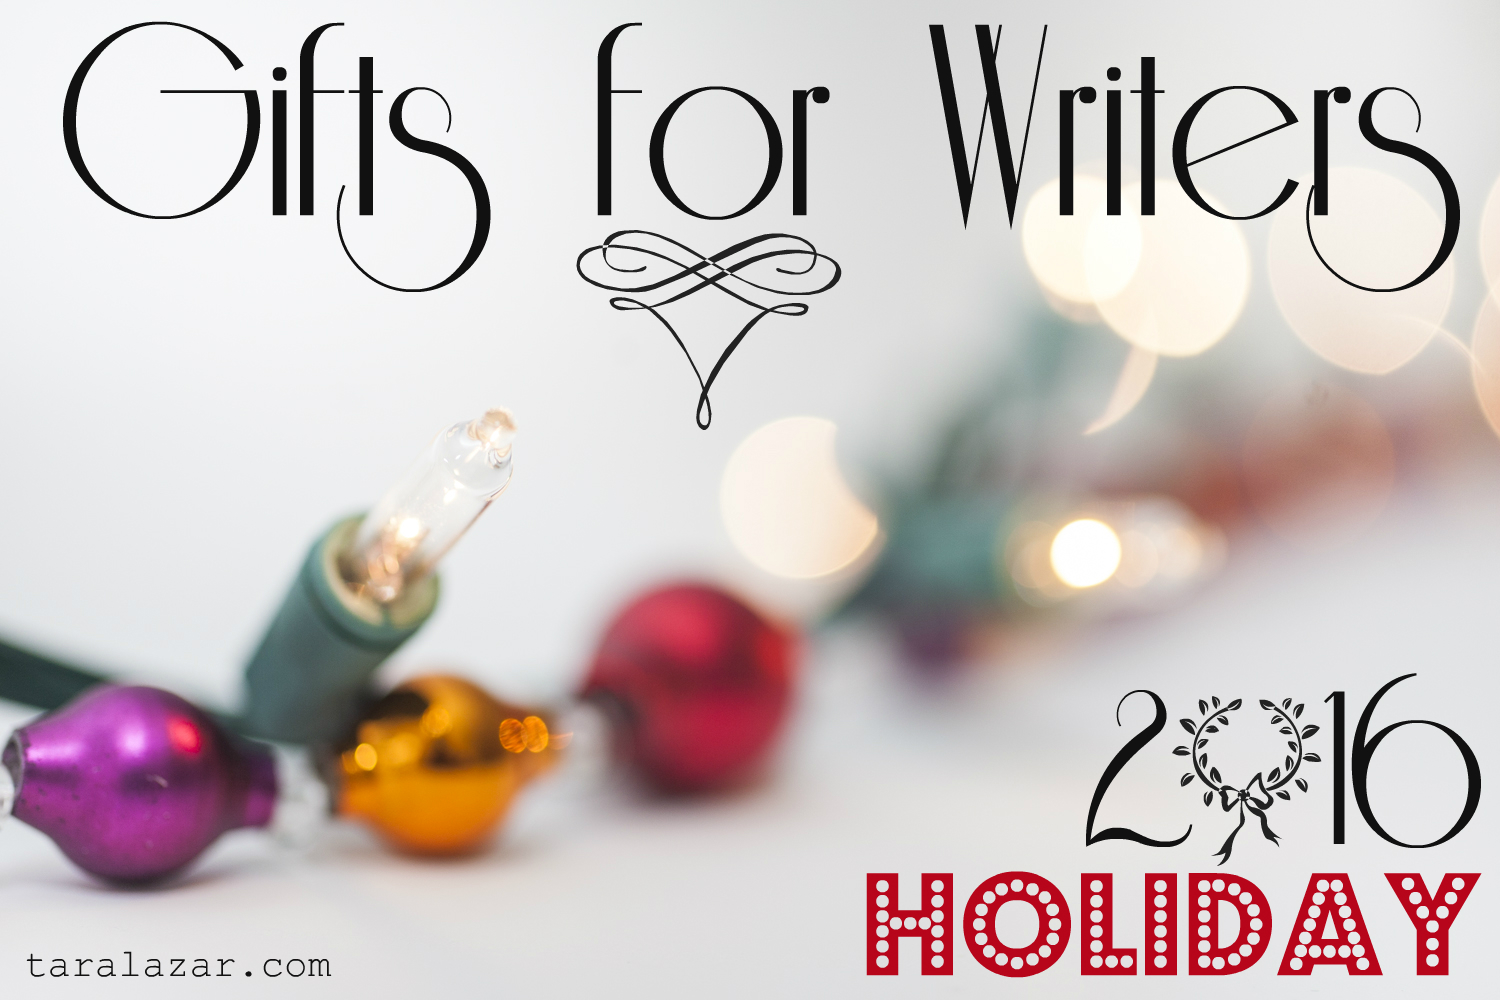 Gifts for Writers: Holiday 2016 Edition